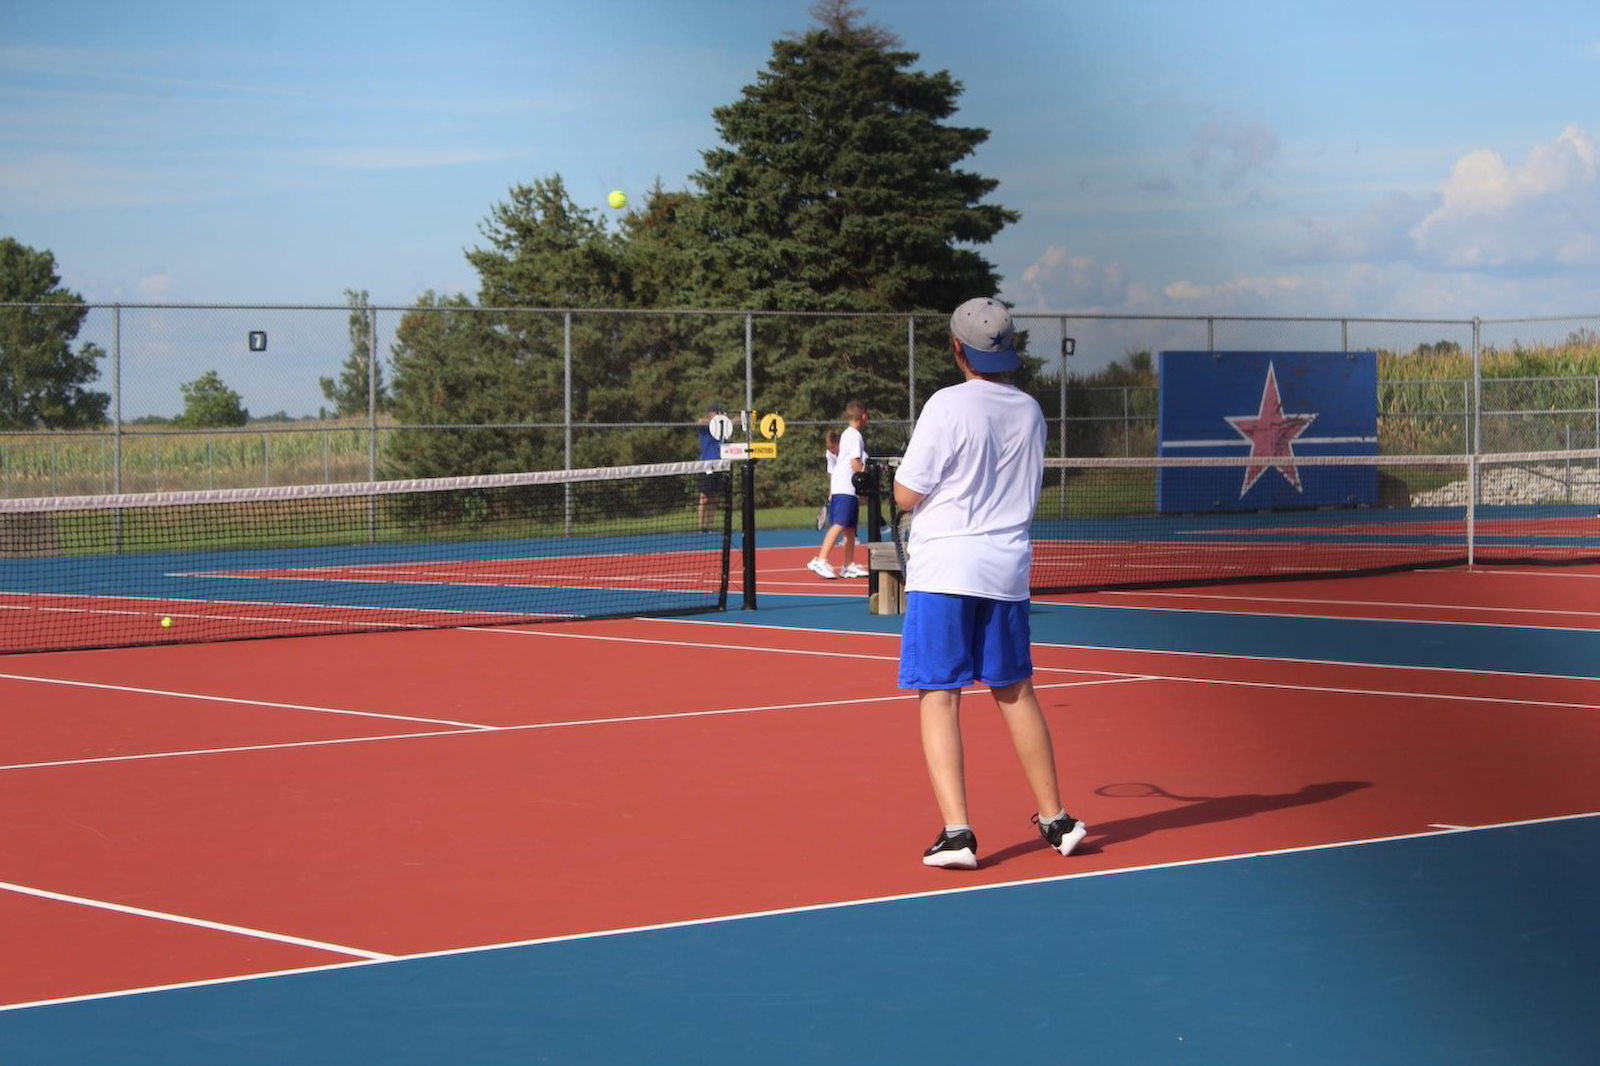 Rematch vs. Athenians resulted in 3-2 win for the JH Tennis team cover photo